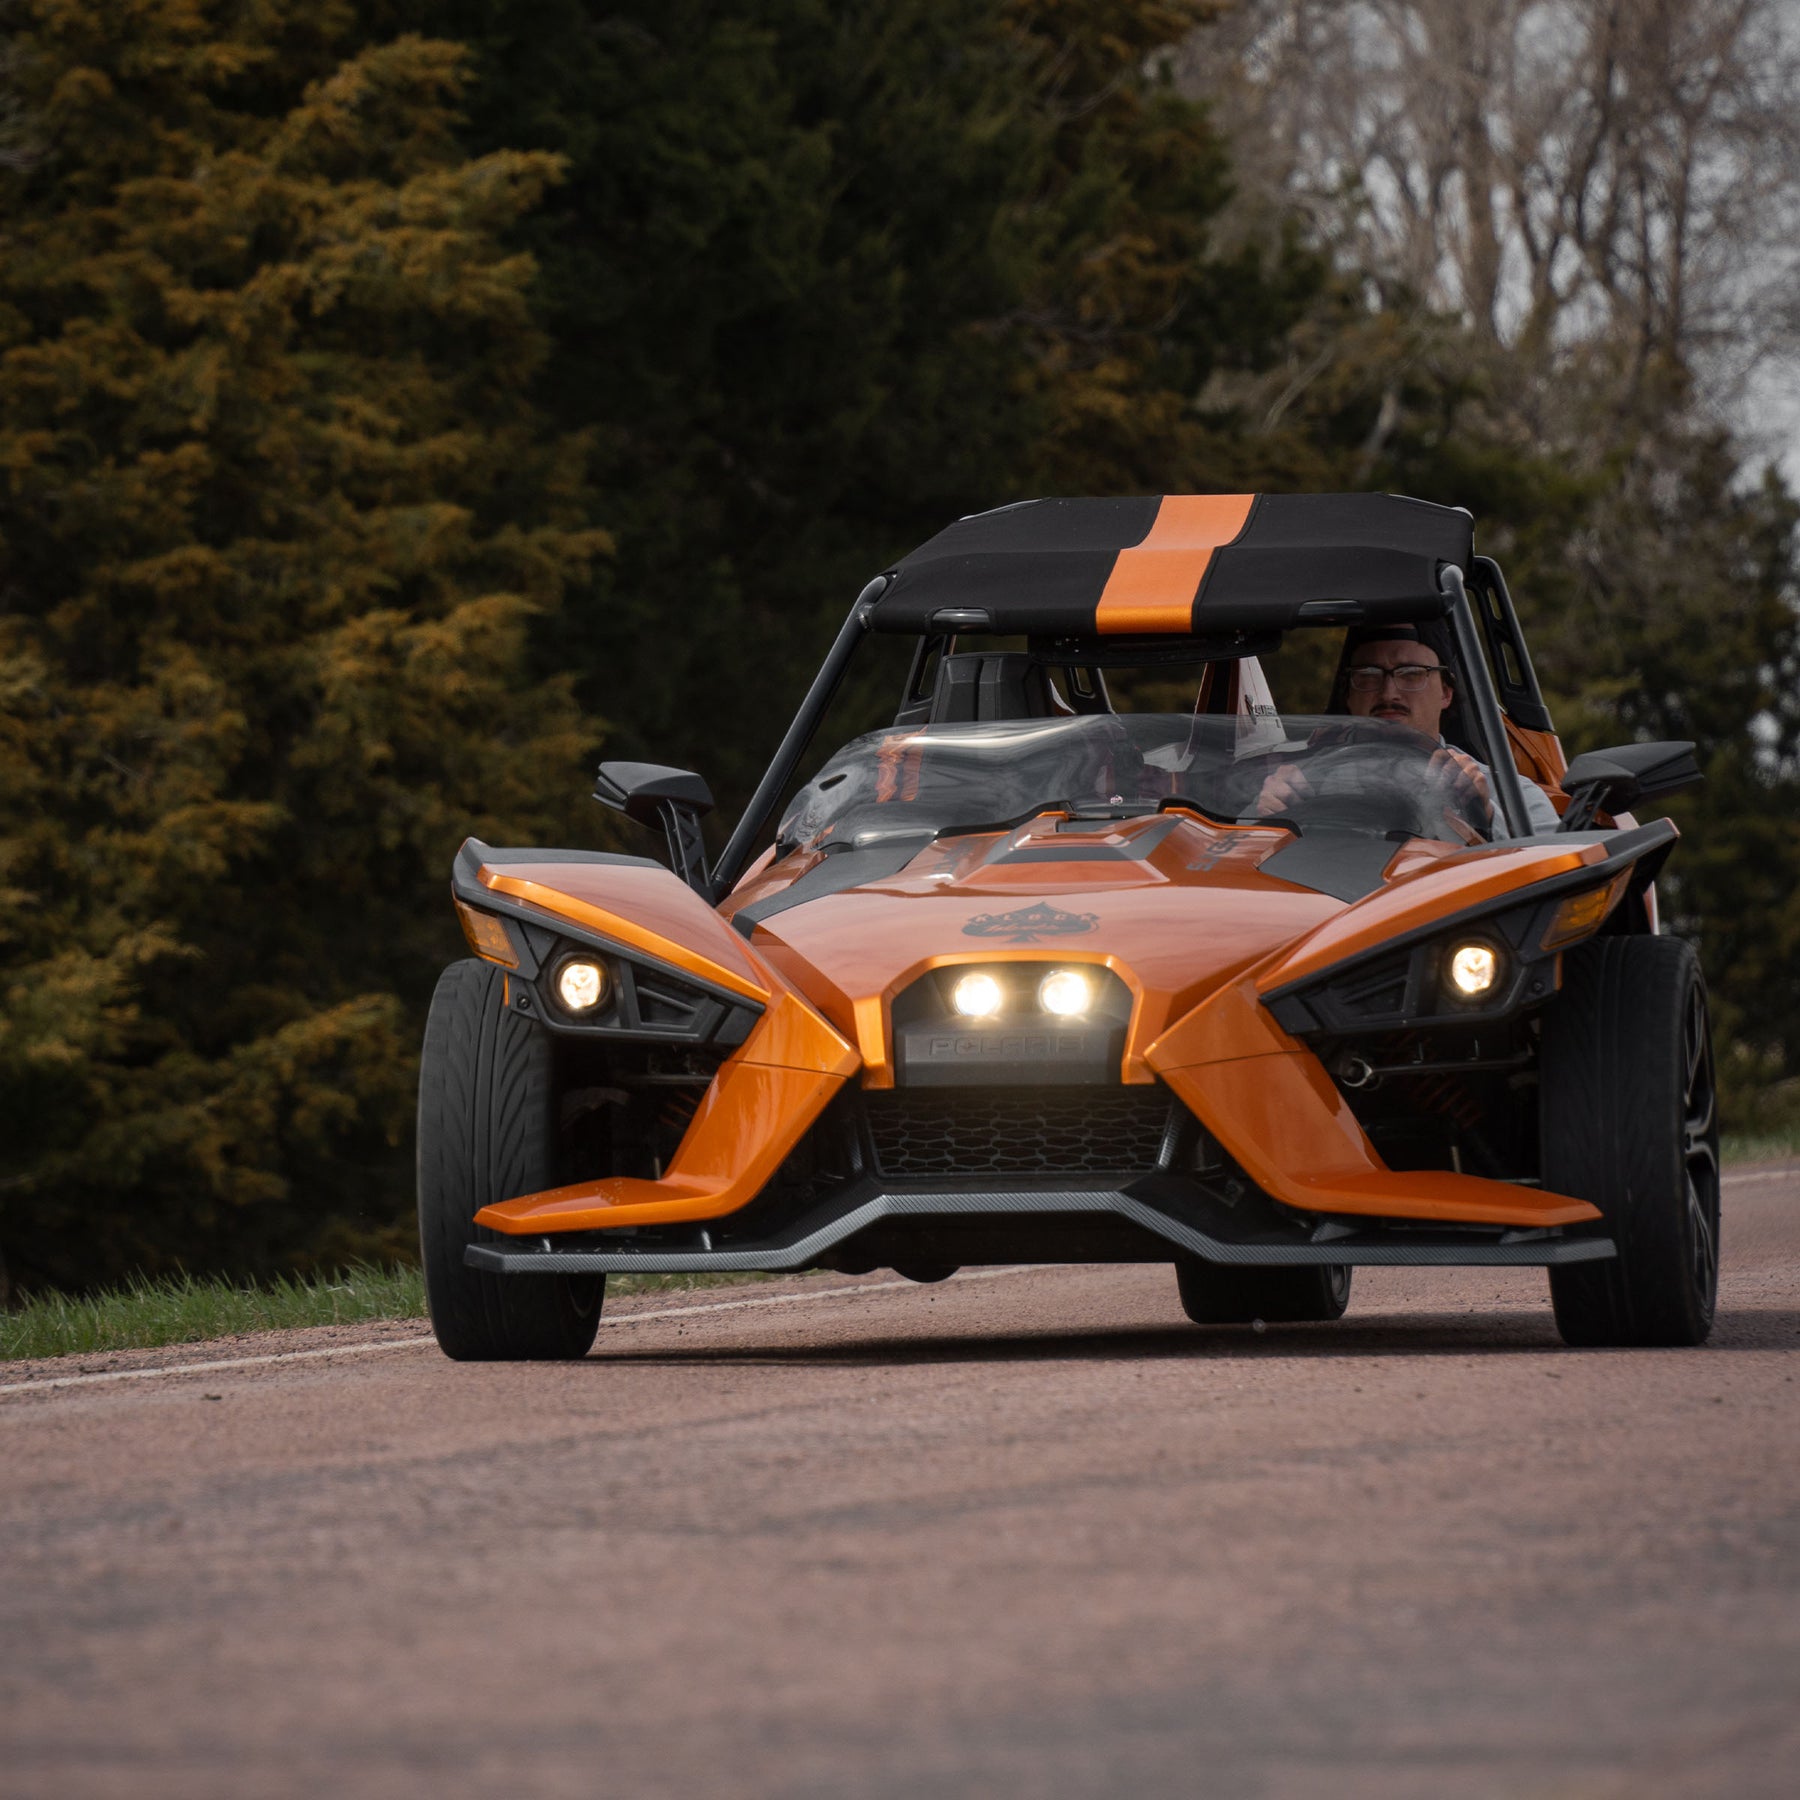 Tint Flare™ Windshield for Polaris® Slingshot shown in action